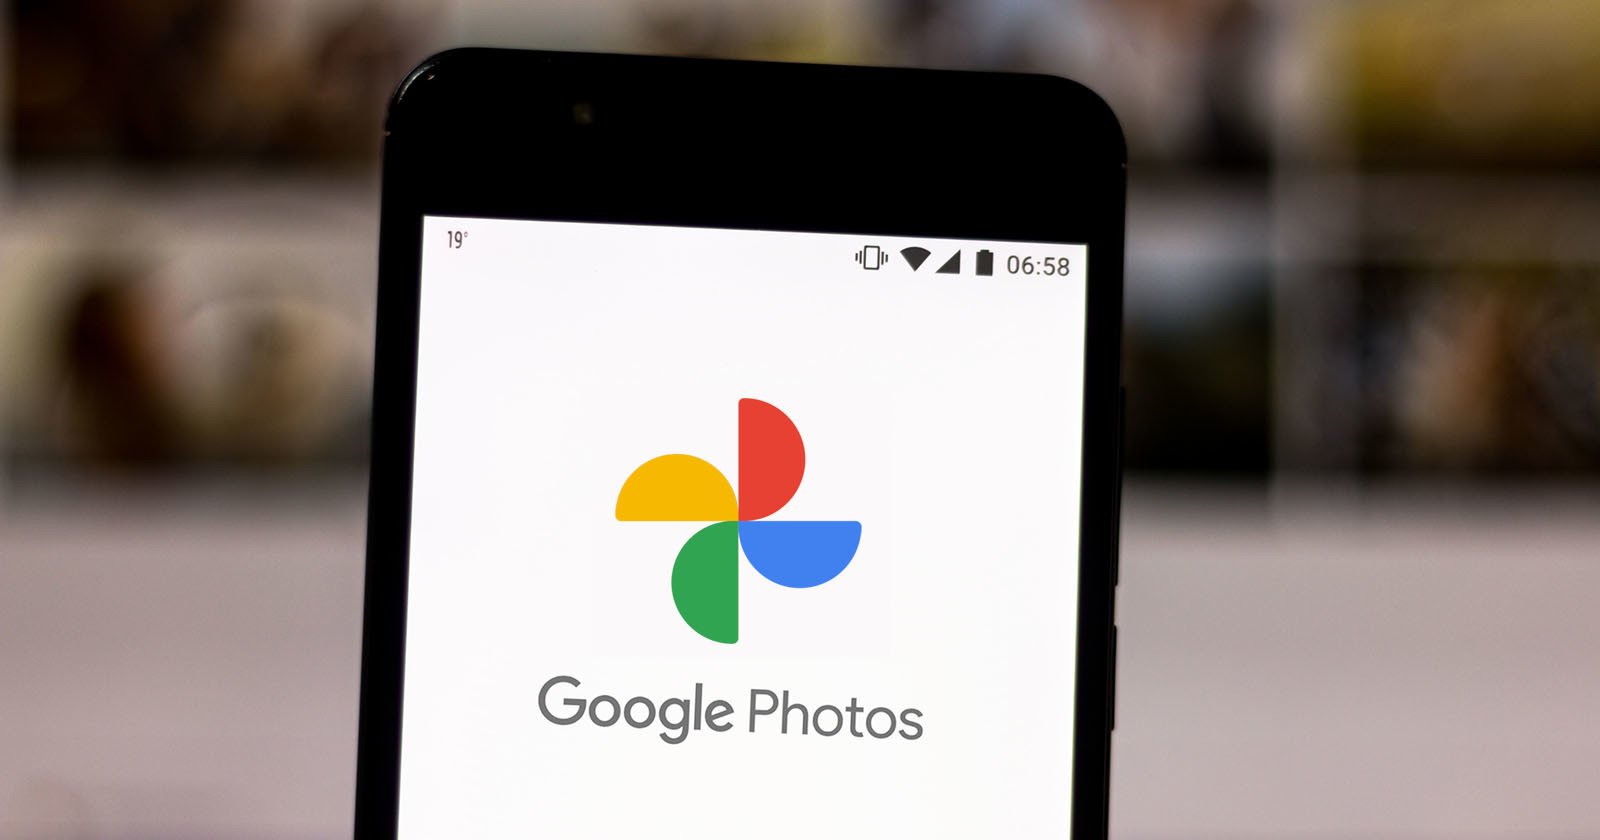 Google Photos Updates Layout to Make Finding Photos Much Easier